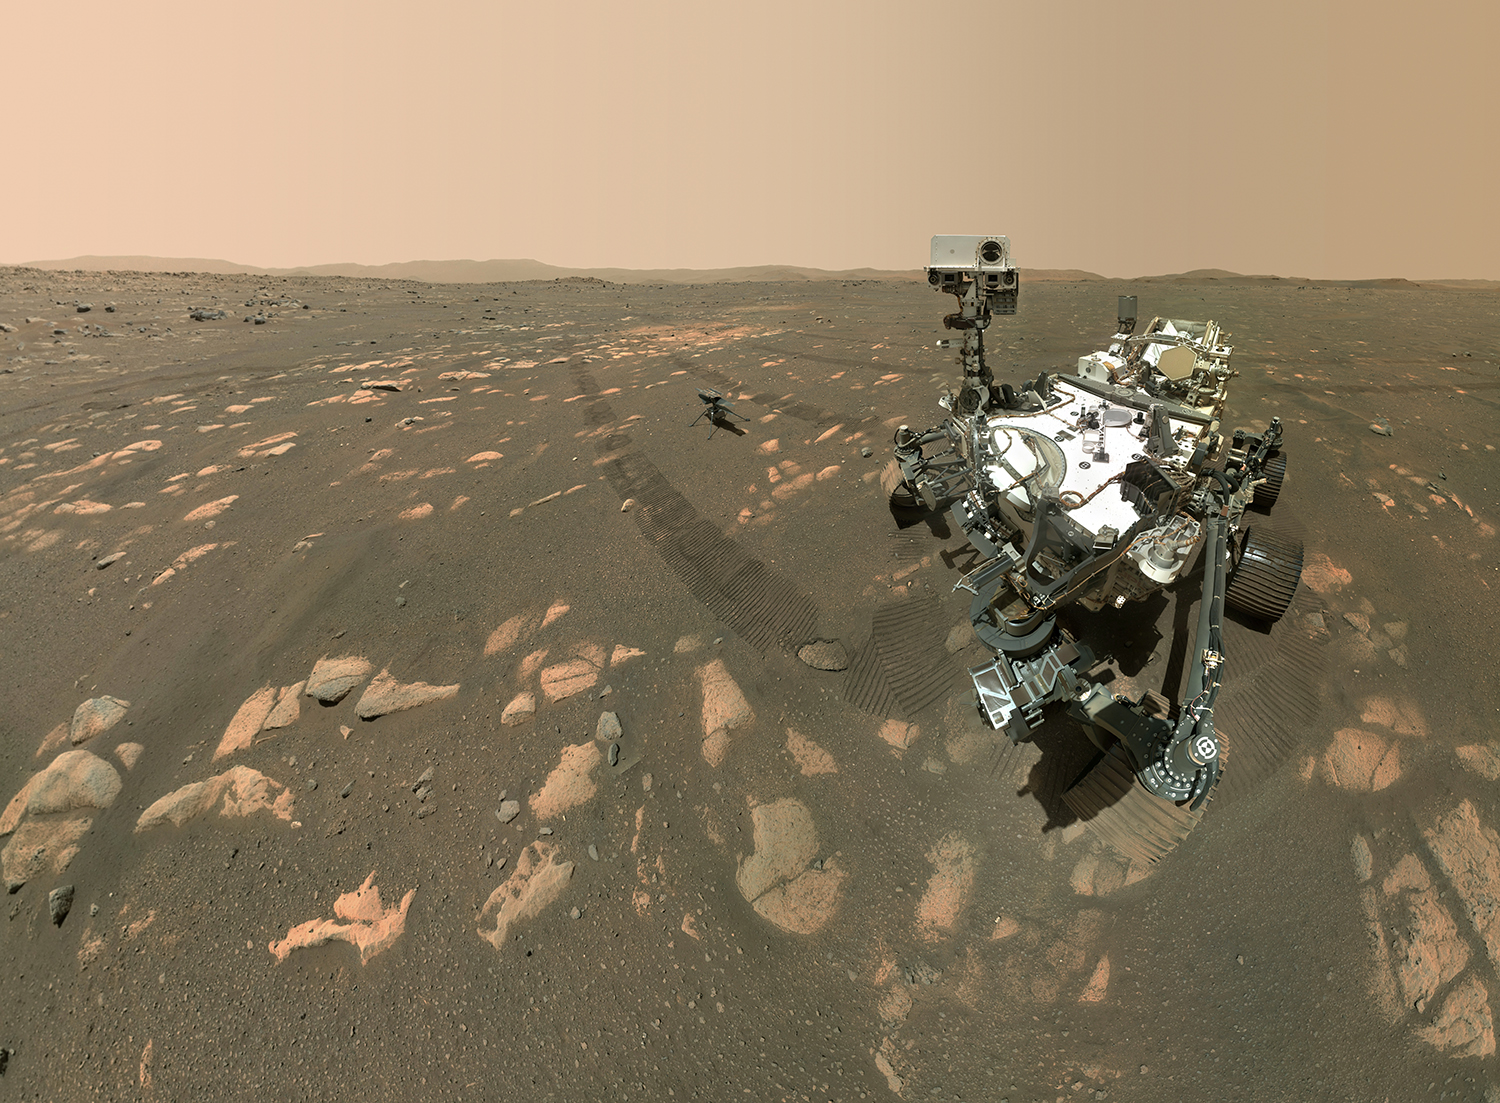 The Mars rover stands on the surface of Mars